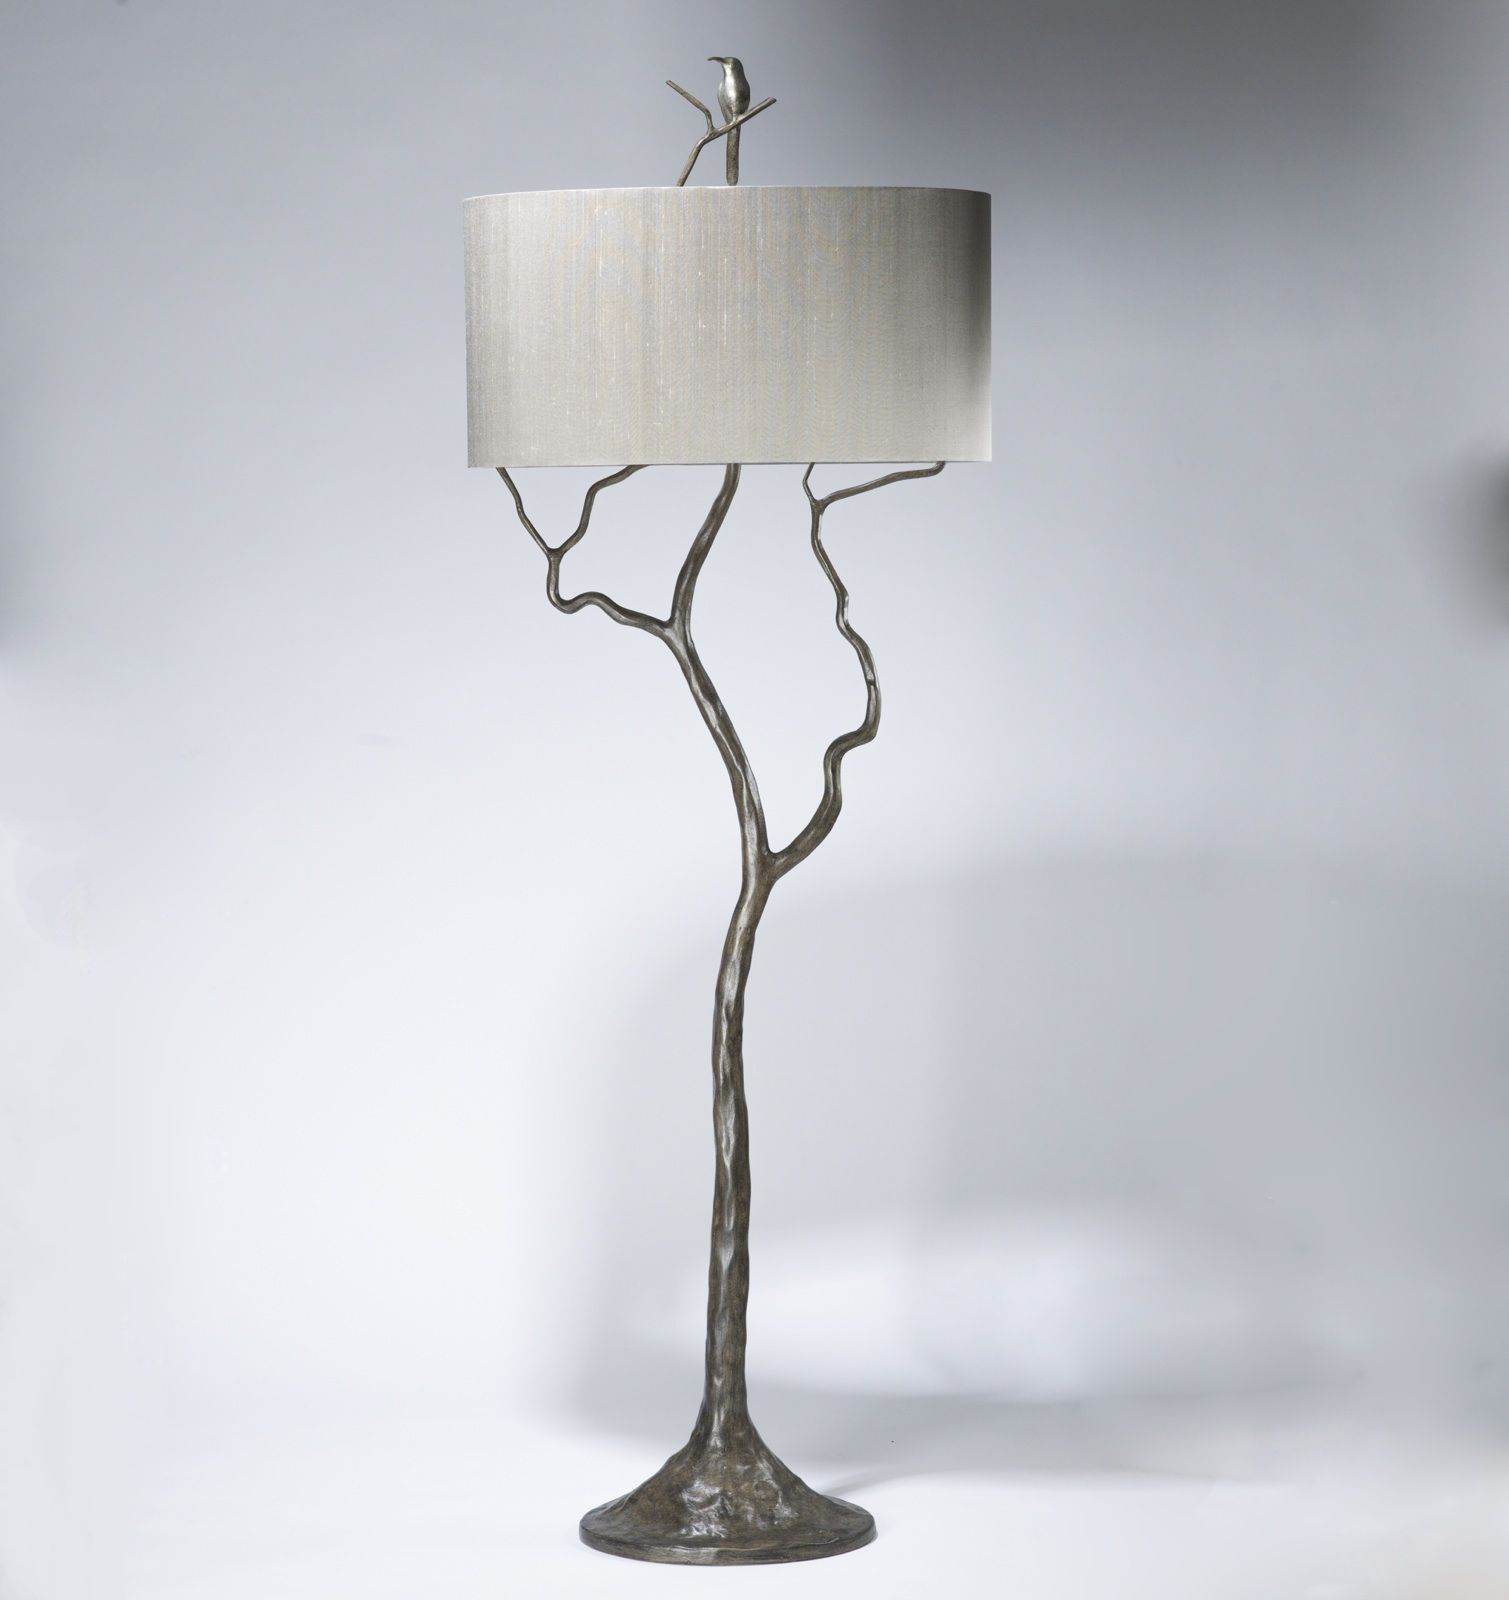 Gray Floor Lamp Google Search Tree Floor Lamp Tall in sizing 1509 X 1600